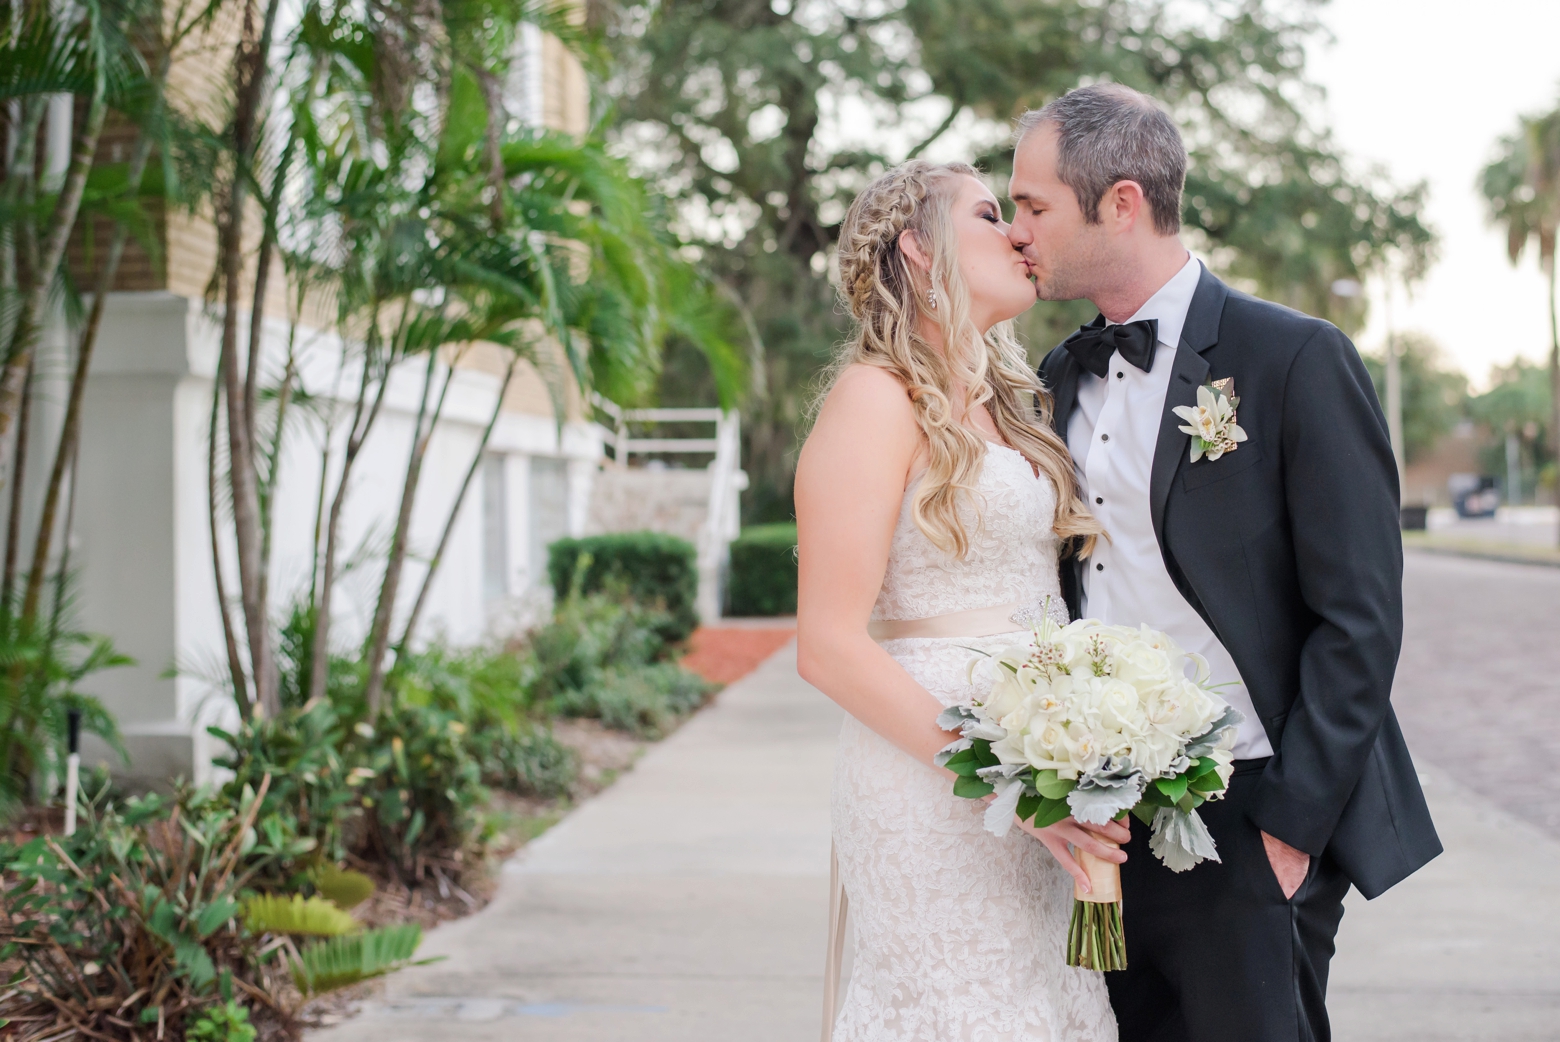 Bride and Groom share a kiss on the palm lined streets of South Tampa, FL